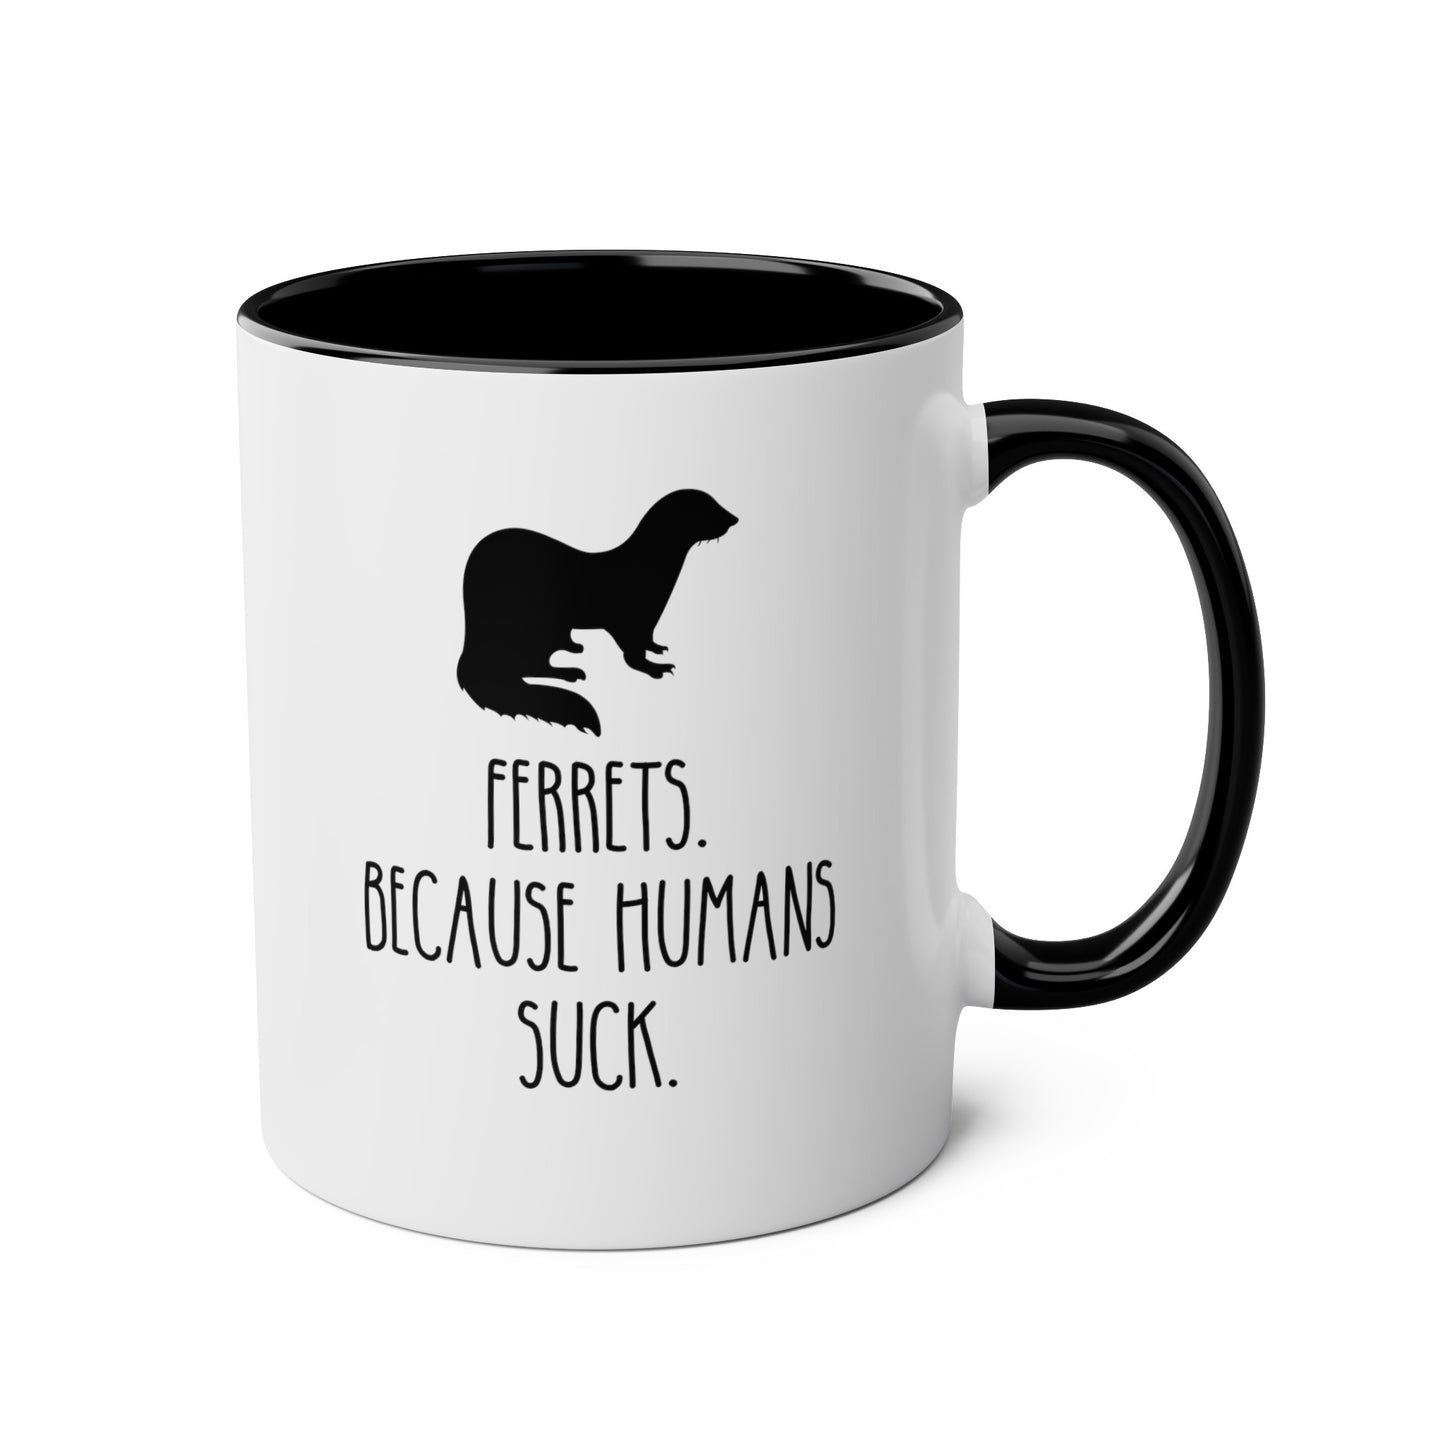 Ferrets Because Humans Suck 11oz white with black accent funny large coffee mug gift for cute ferret mom lover owner waveywares wavey wares wavywares wavy wares